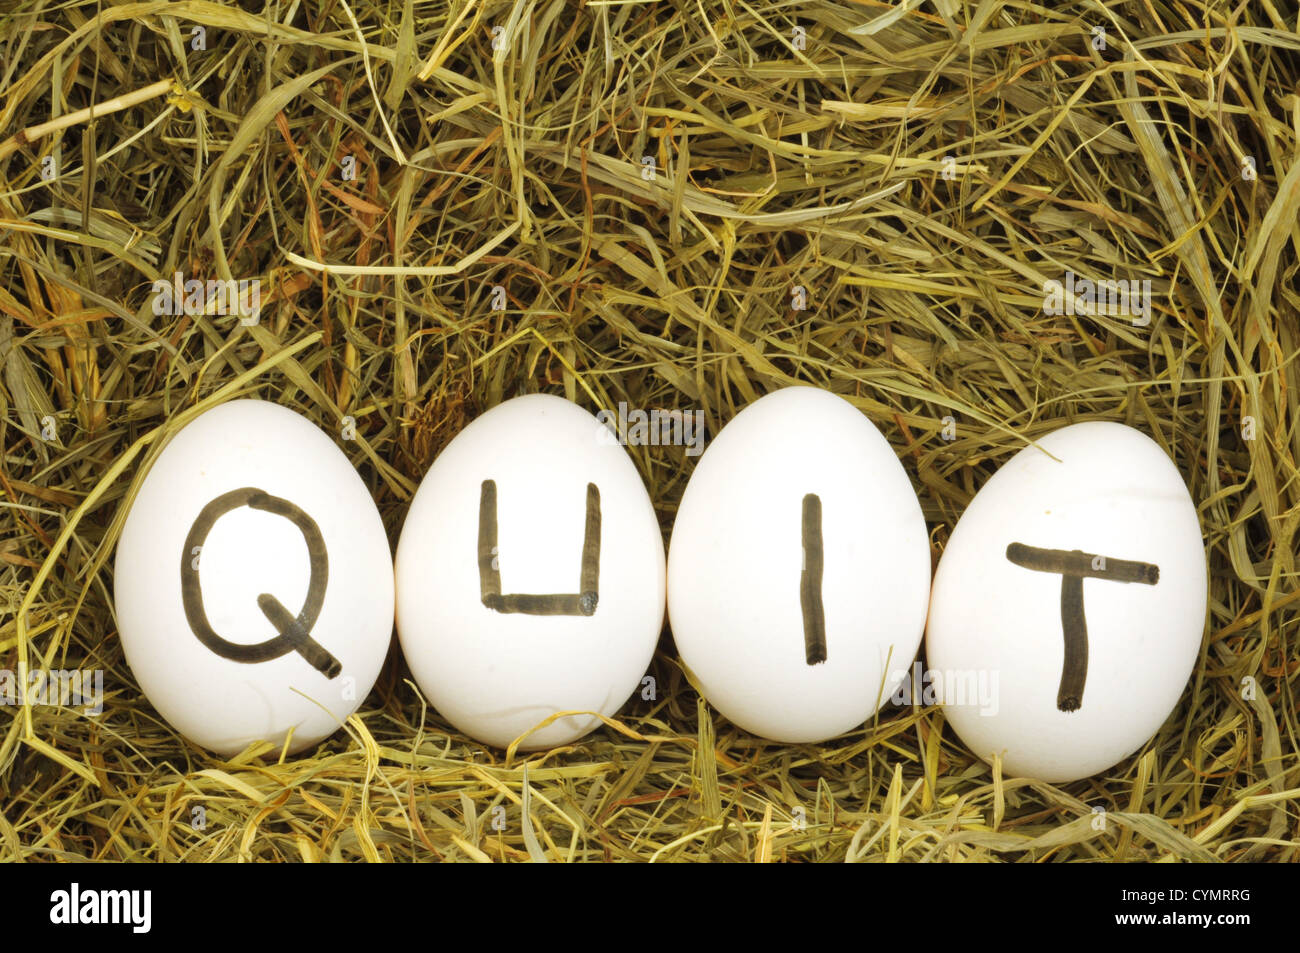 quit written on eggs in hey or straw Stock Photo